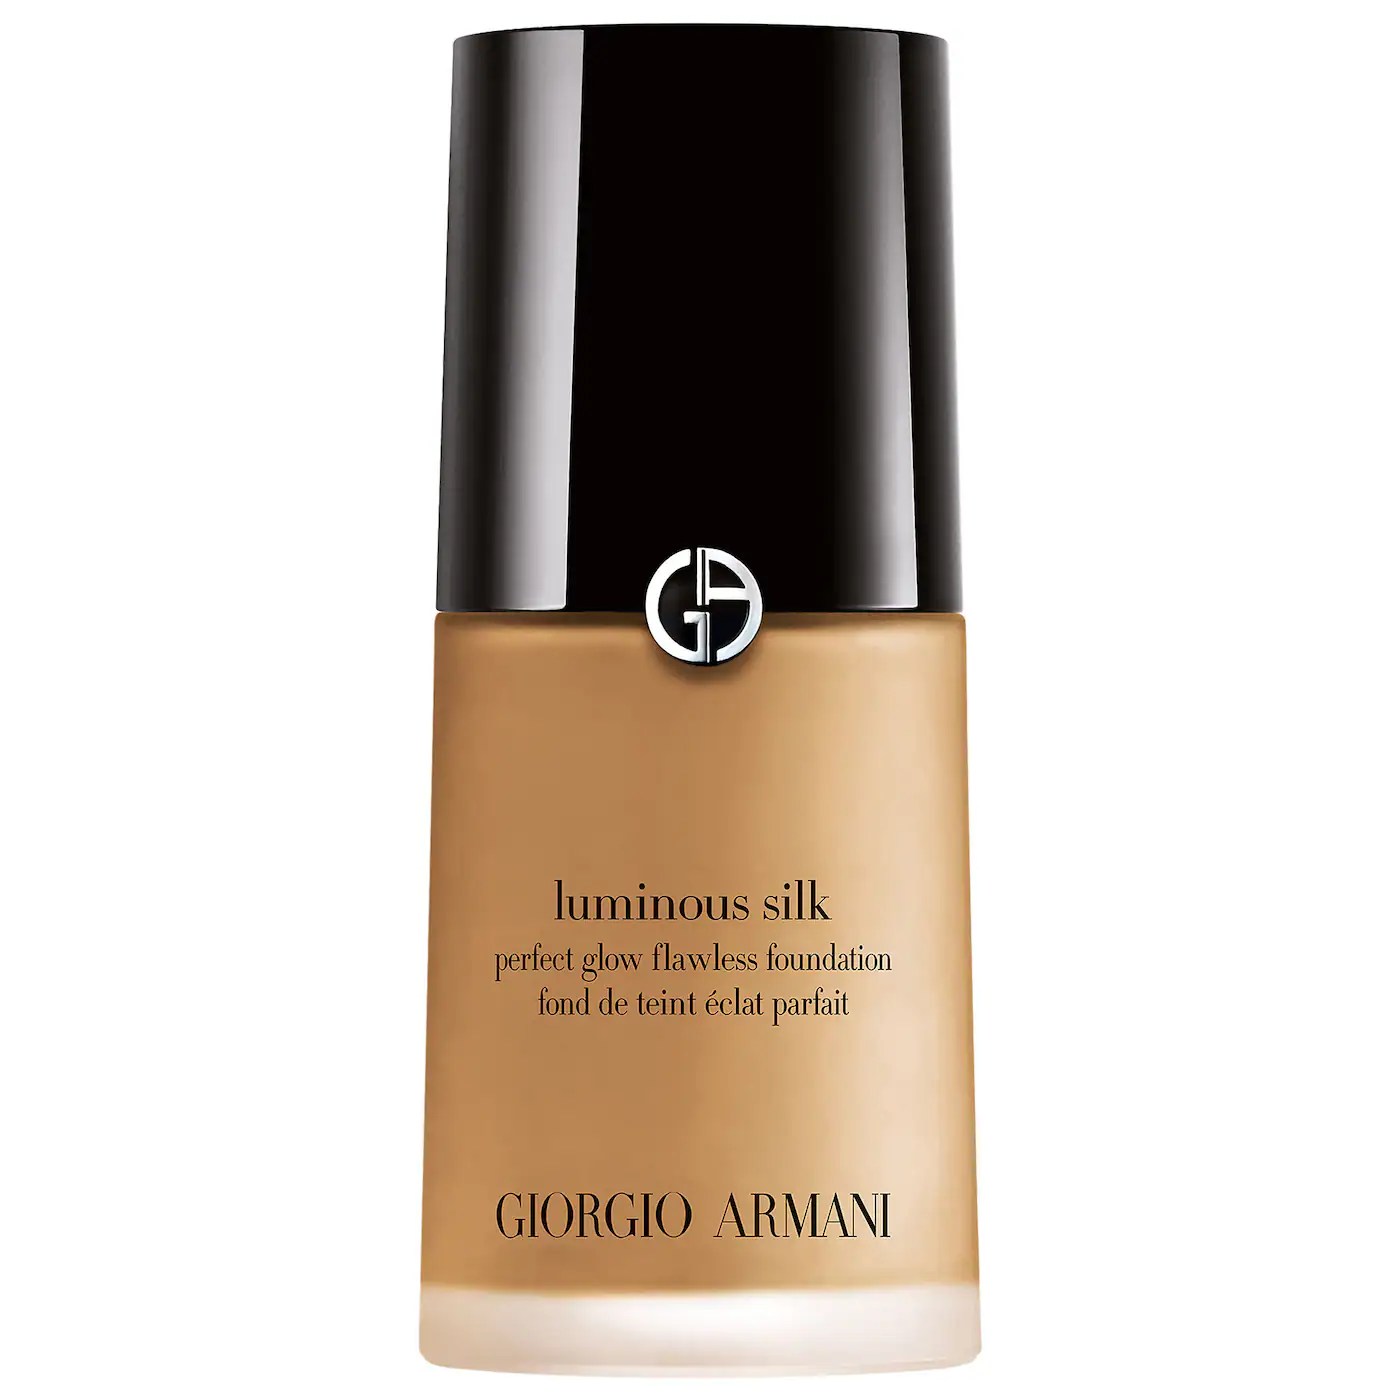 armani luminous silk, one of the best foundations for acne-prone skin